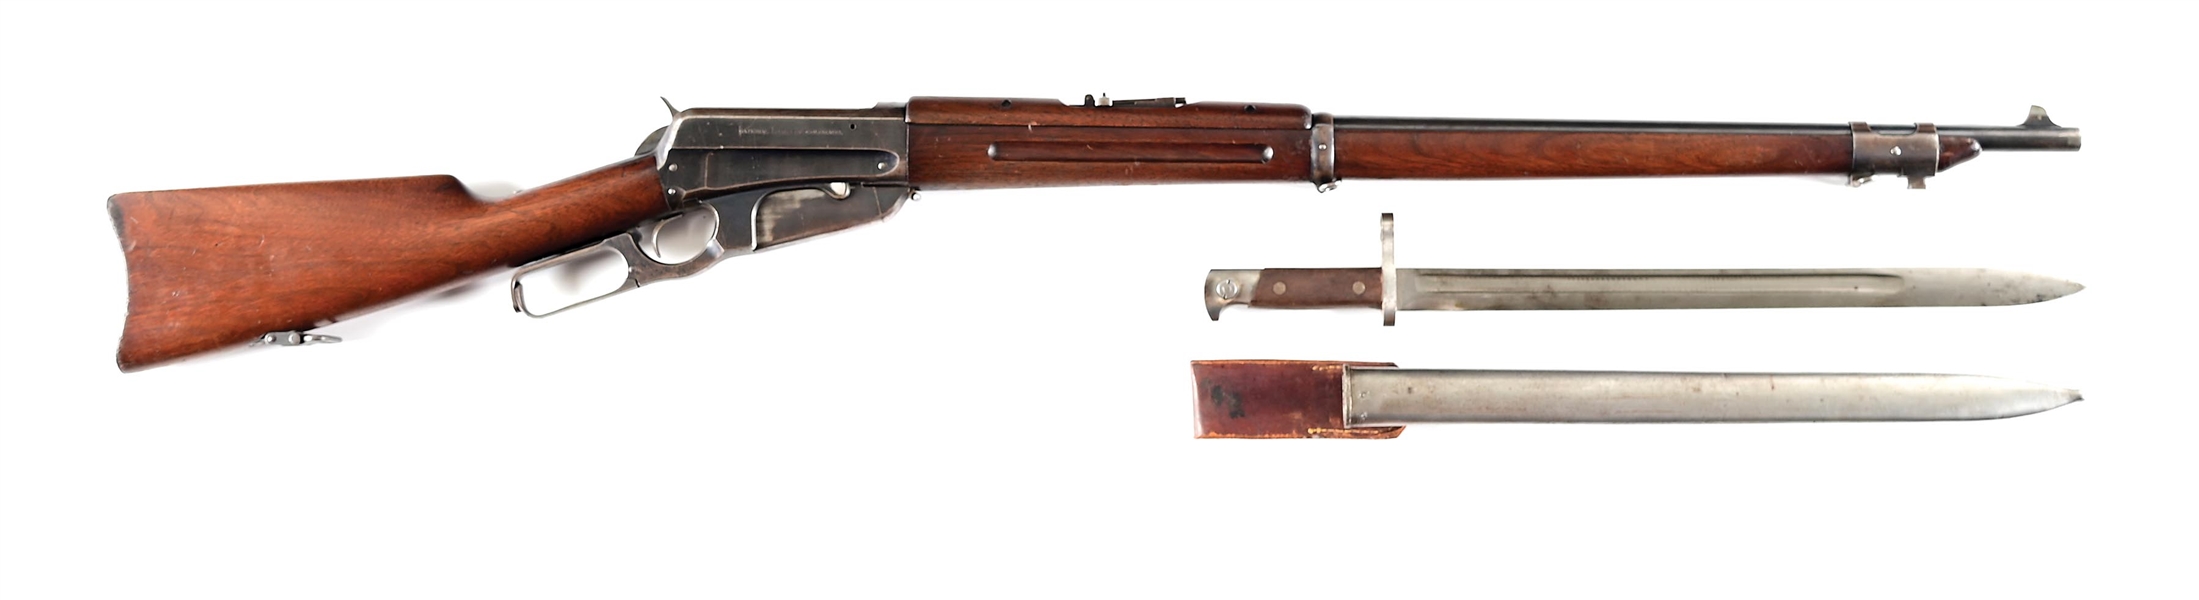 (A) NATIONAL GUARD OF COLORADO MARKED WINCHESTER MODEL 1895 LEVER ACTION MUSKET WITH BAYONET (1898).